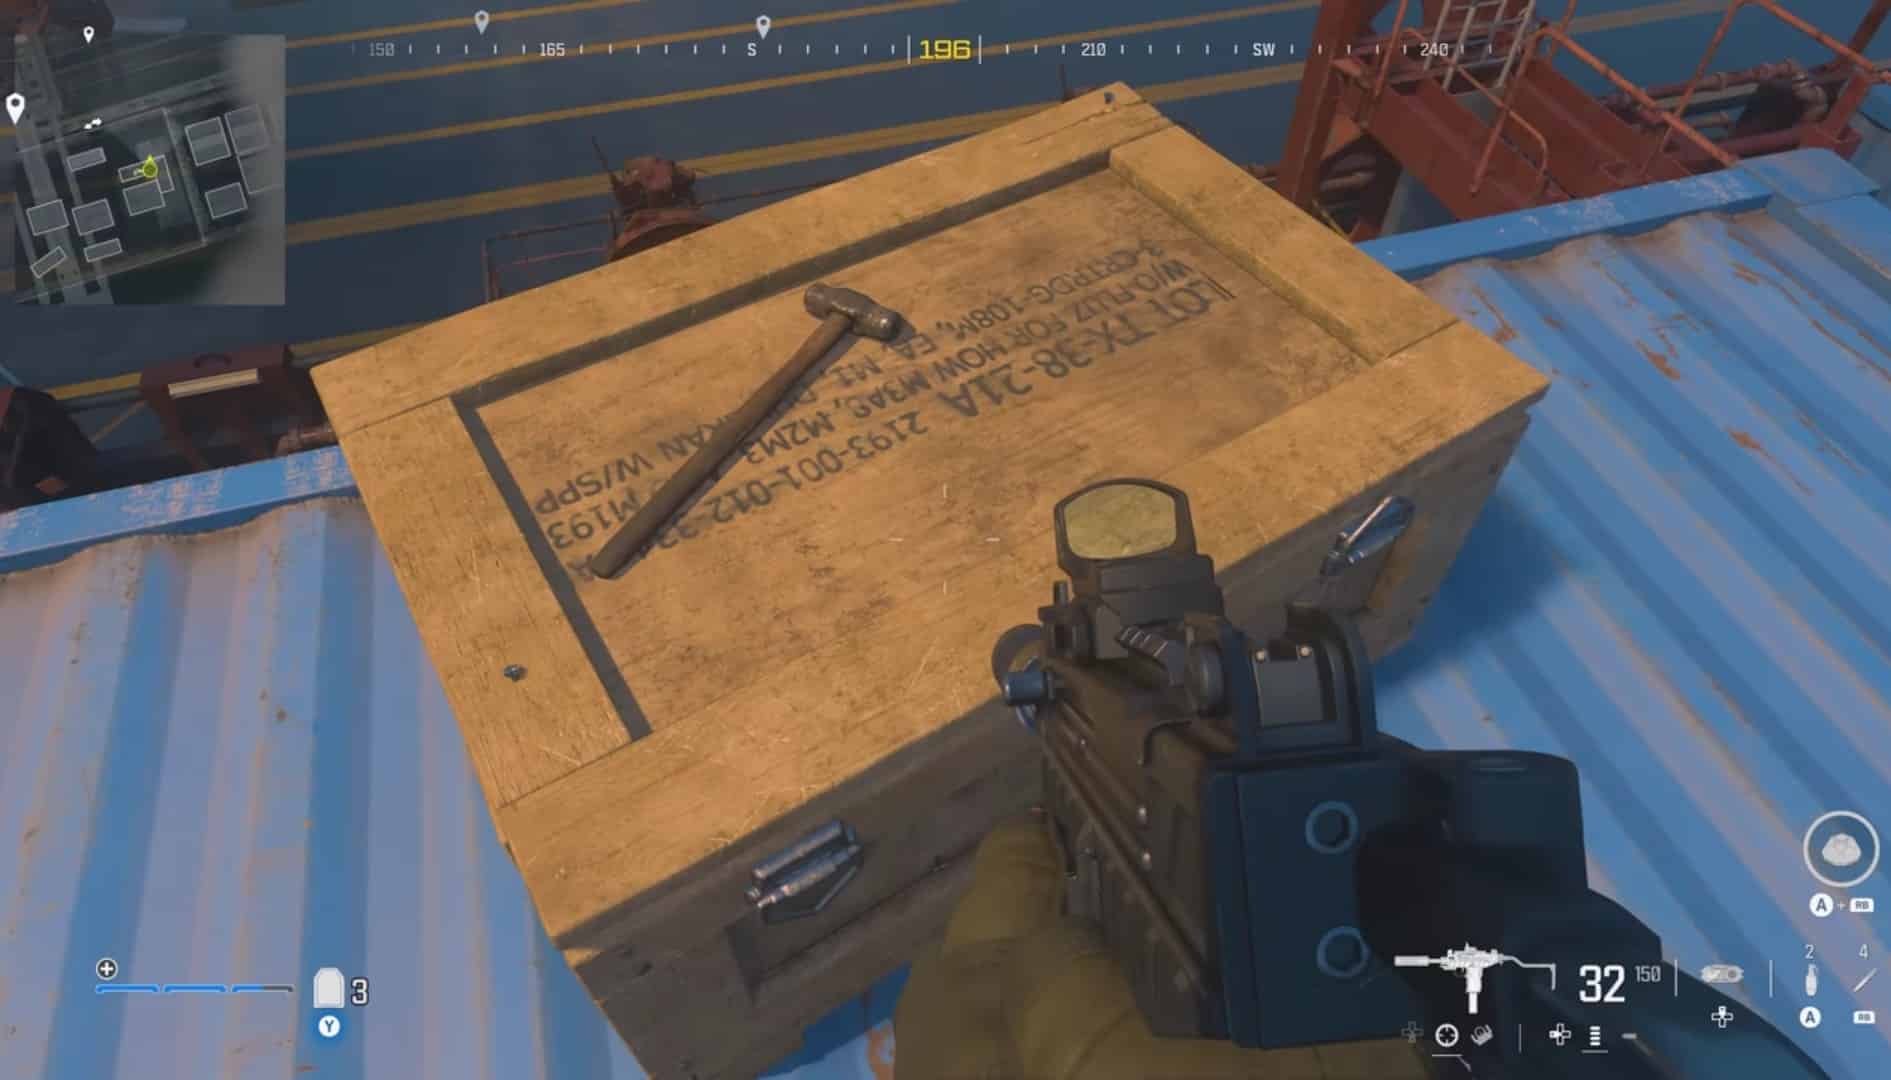 A gun with a hidden crate on top, showcasing MW3 campaign Easter eggs.